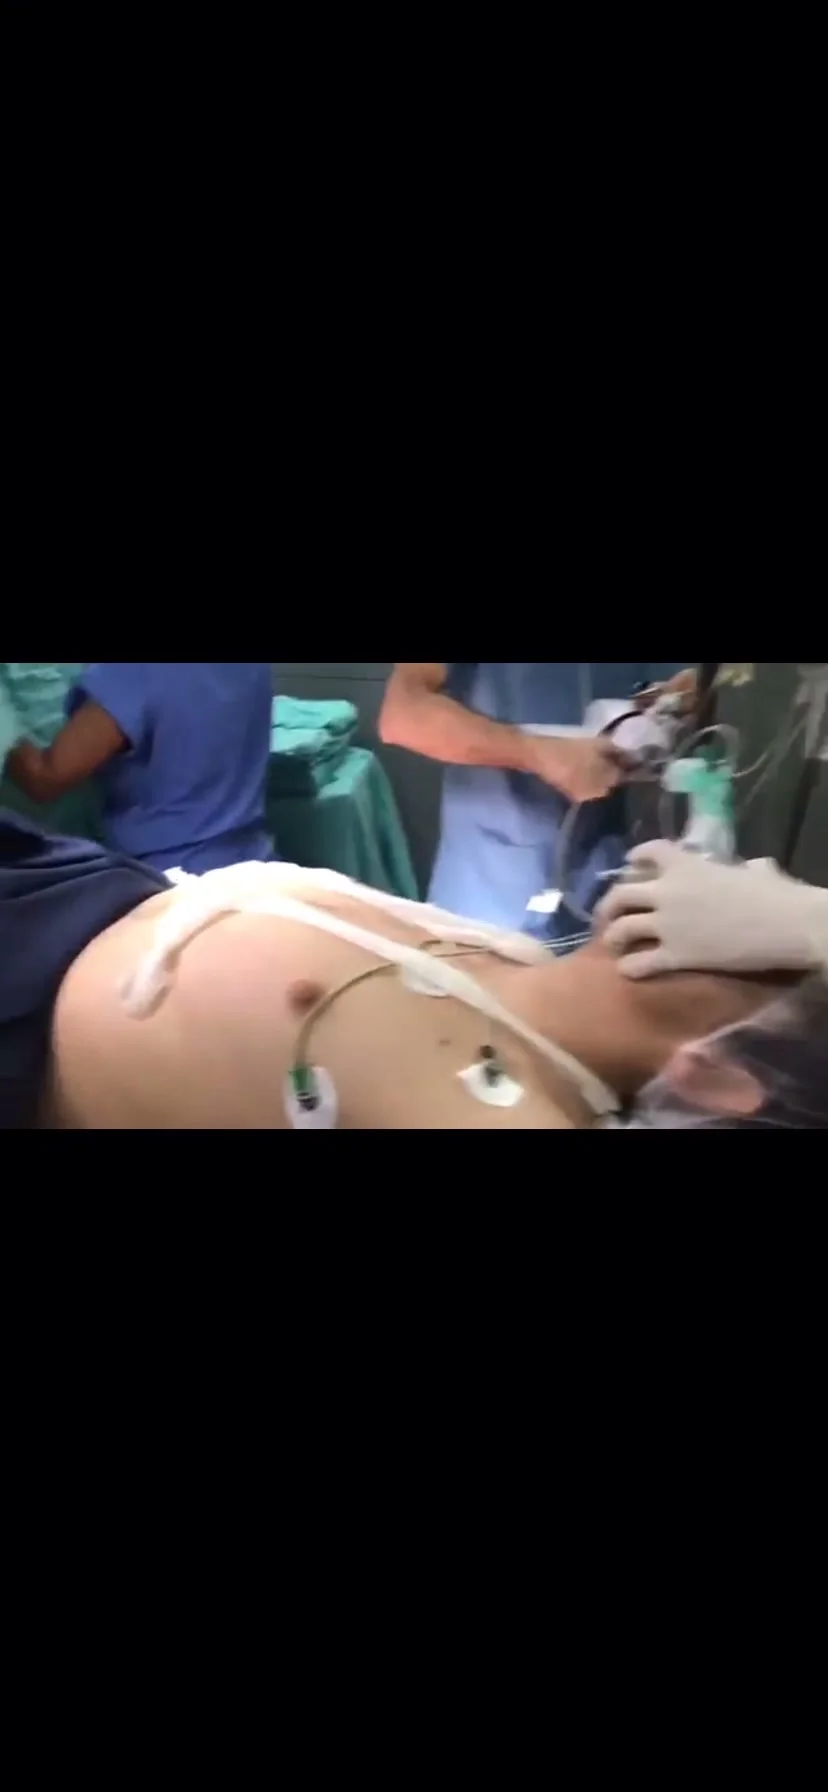 Intubation Porn - Young guy given anesthesia and intubation - ThisVid.com